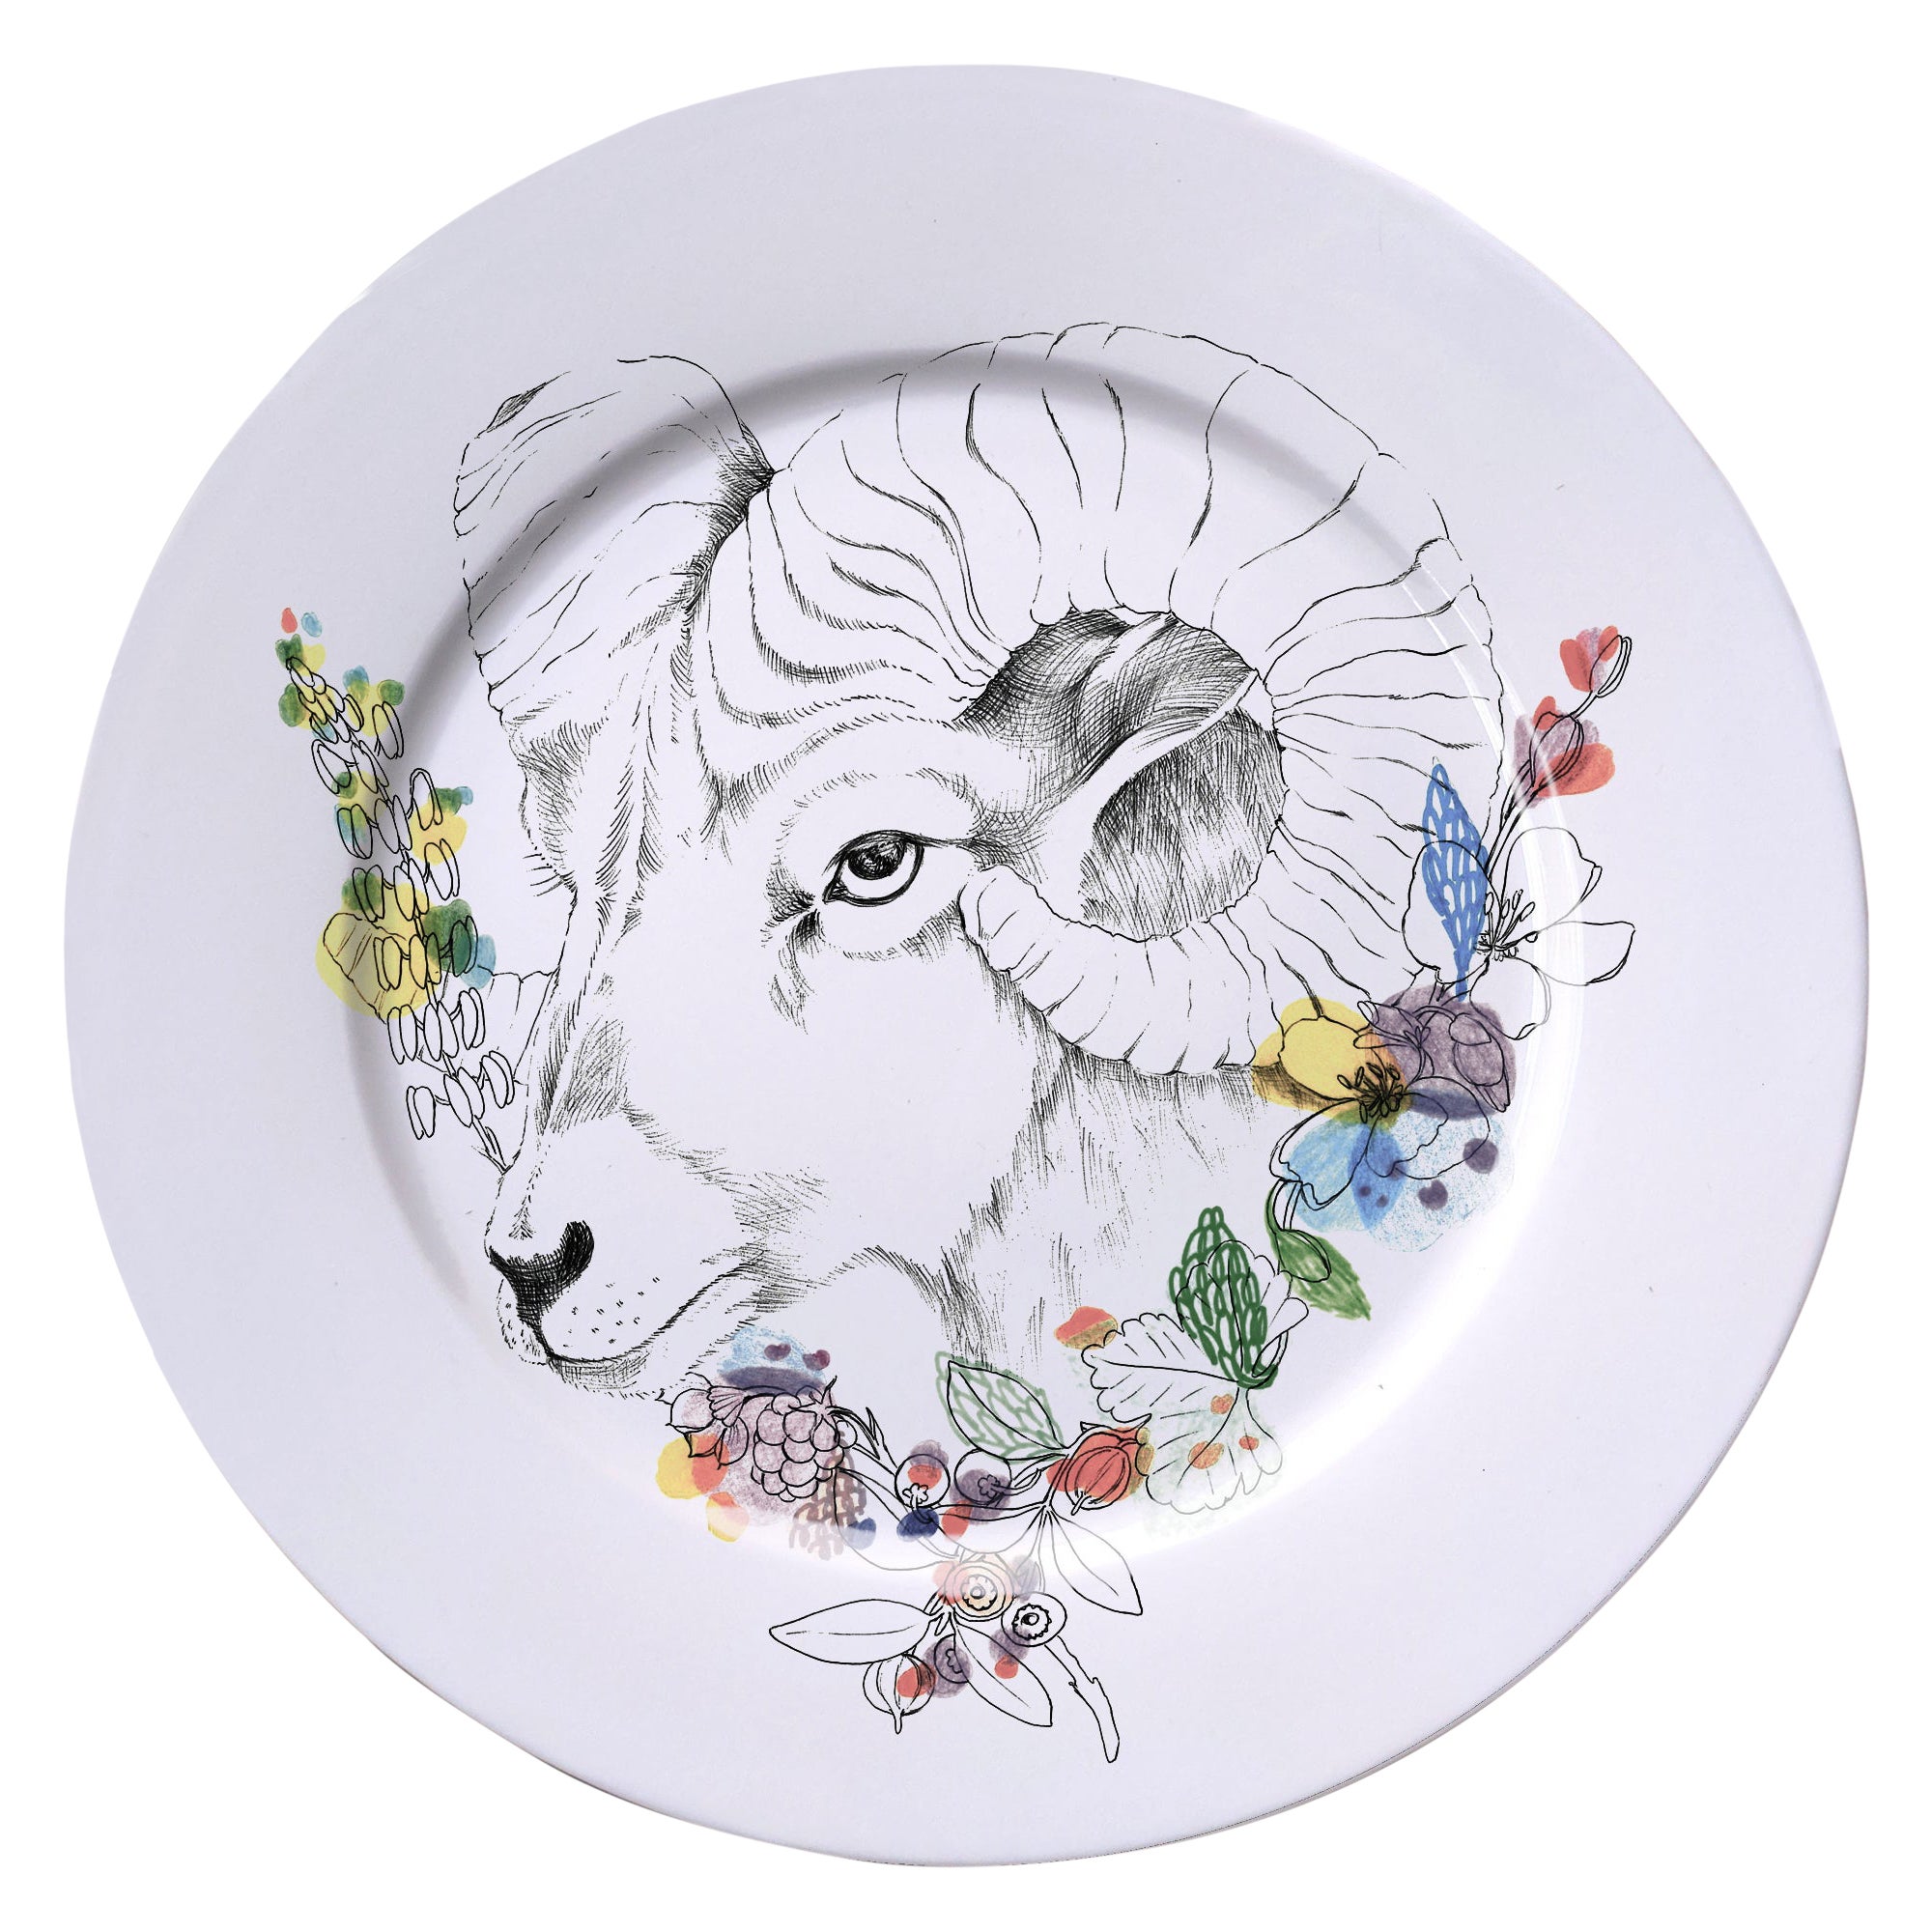 Ode to the Woods, Contemporary Porcelain Dinner Plate with Sheep and Flowers